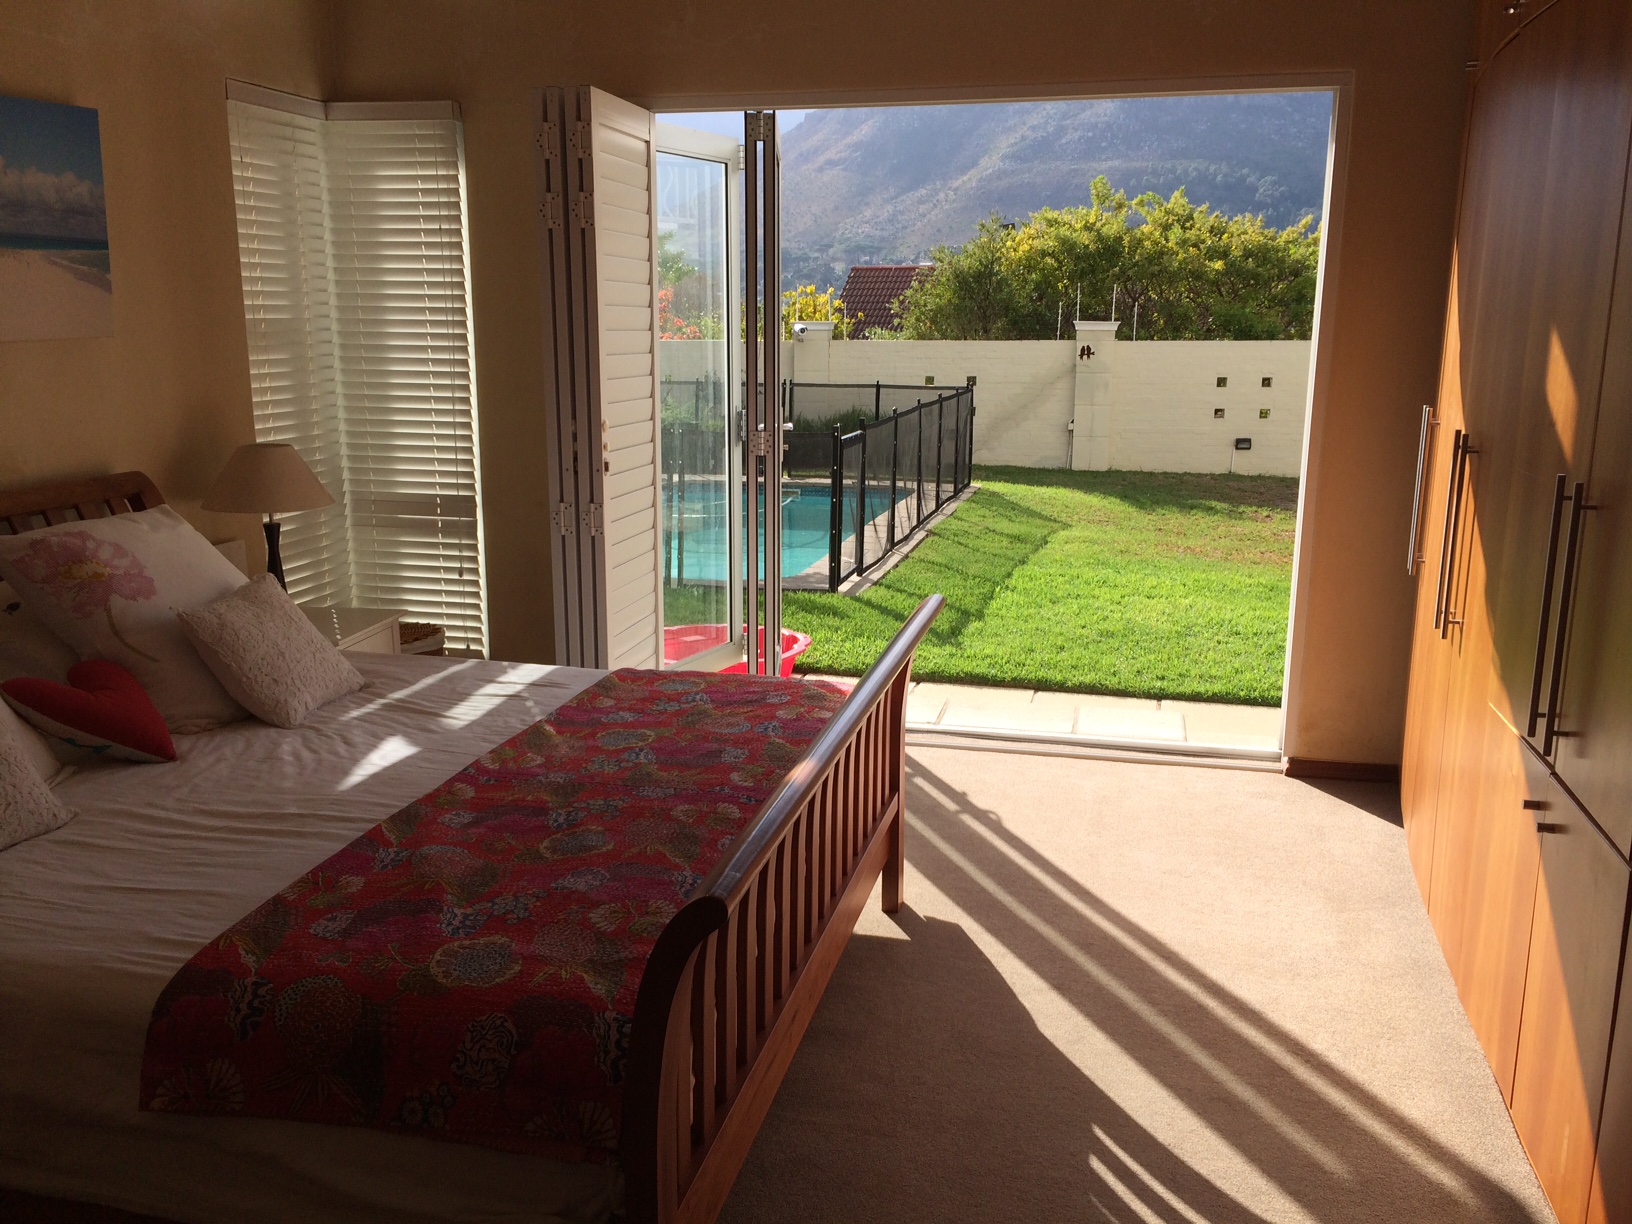 Photo 9 of Northshore House Hout Bay accommodation in Hout Bay, Cape Town with 4 bedrooms and 3 bathrooms